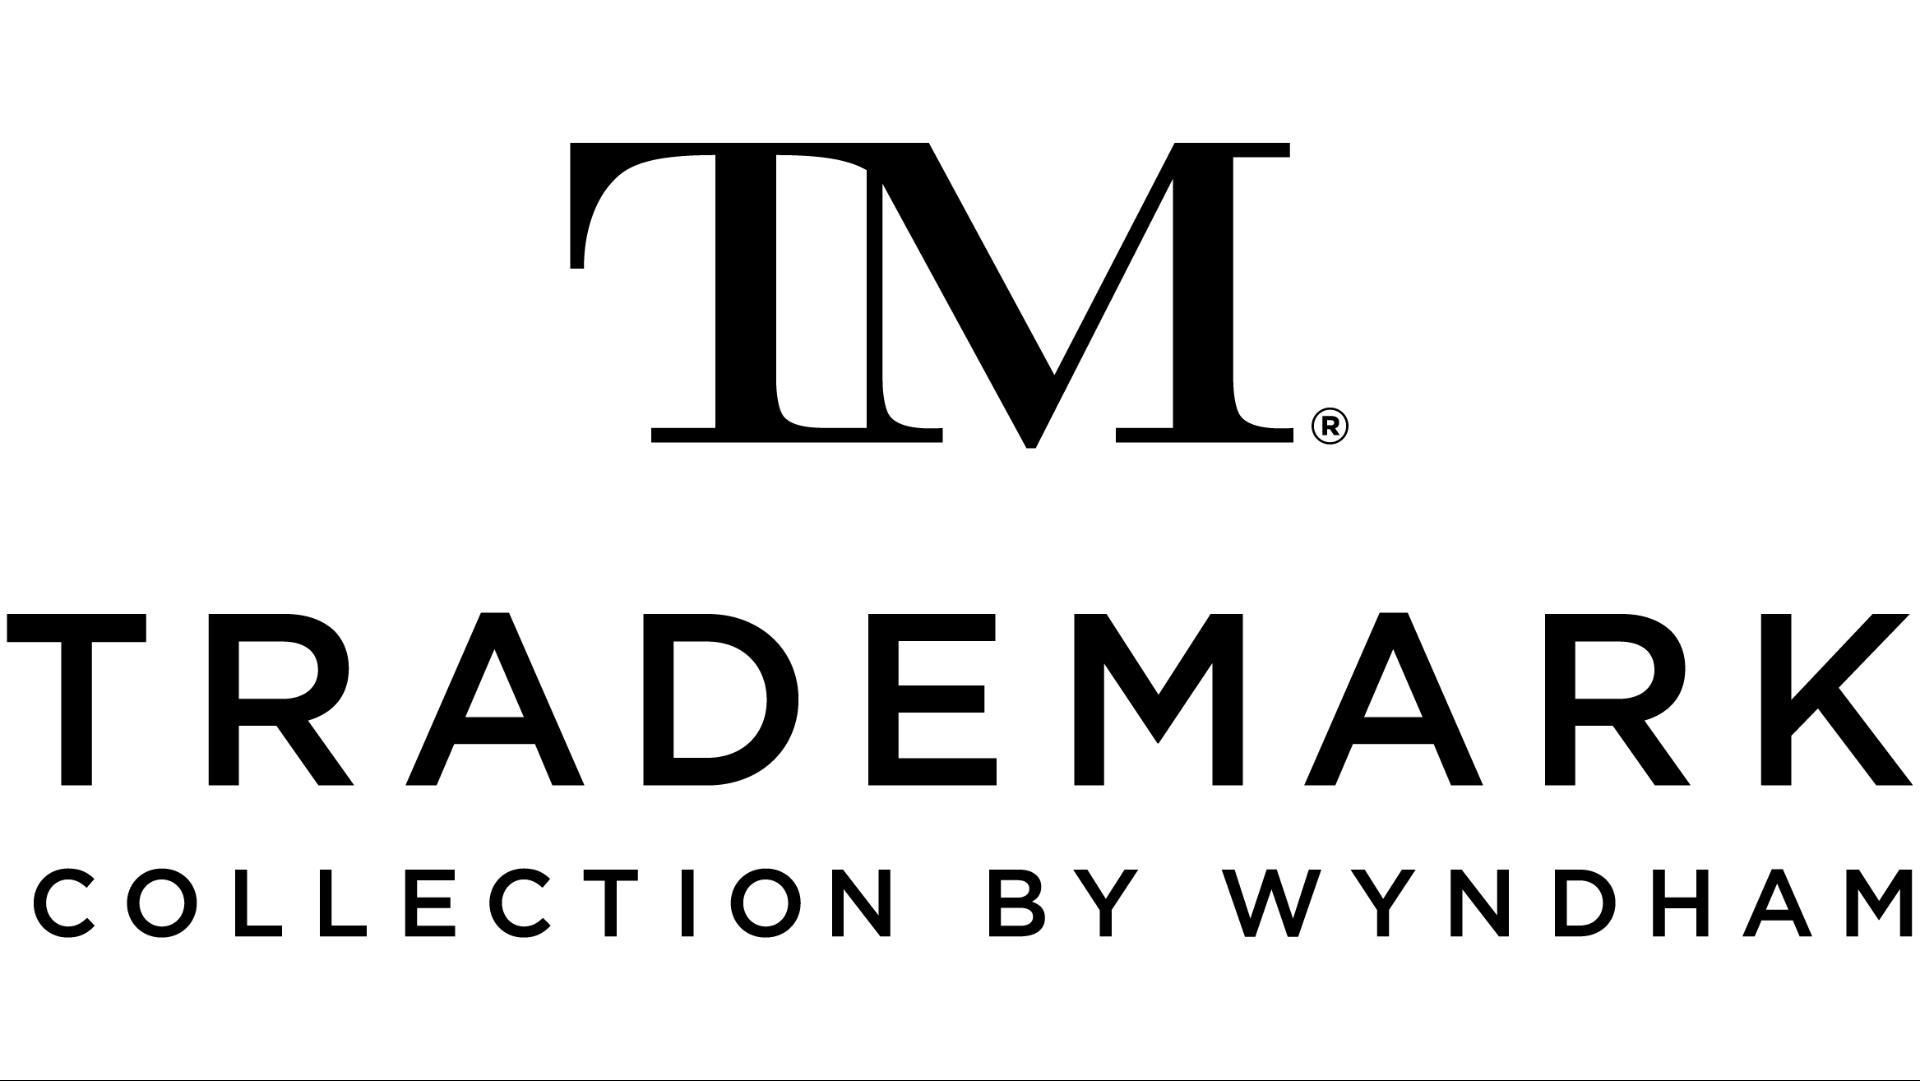 Chateau Fredericton, Trademark Collection by Wyndham in Fredericton, NB